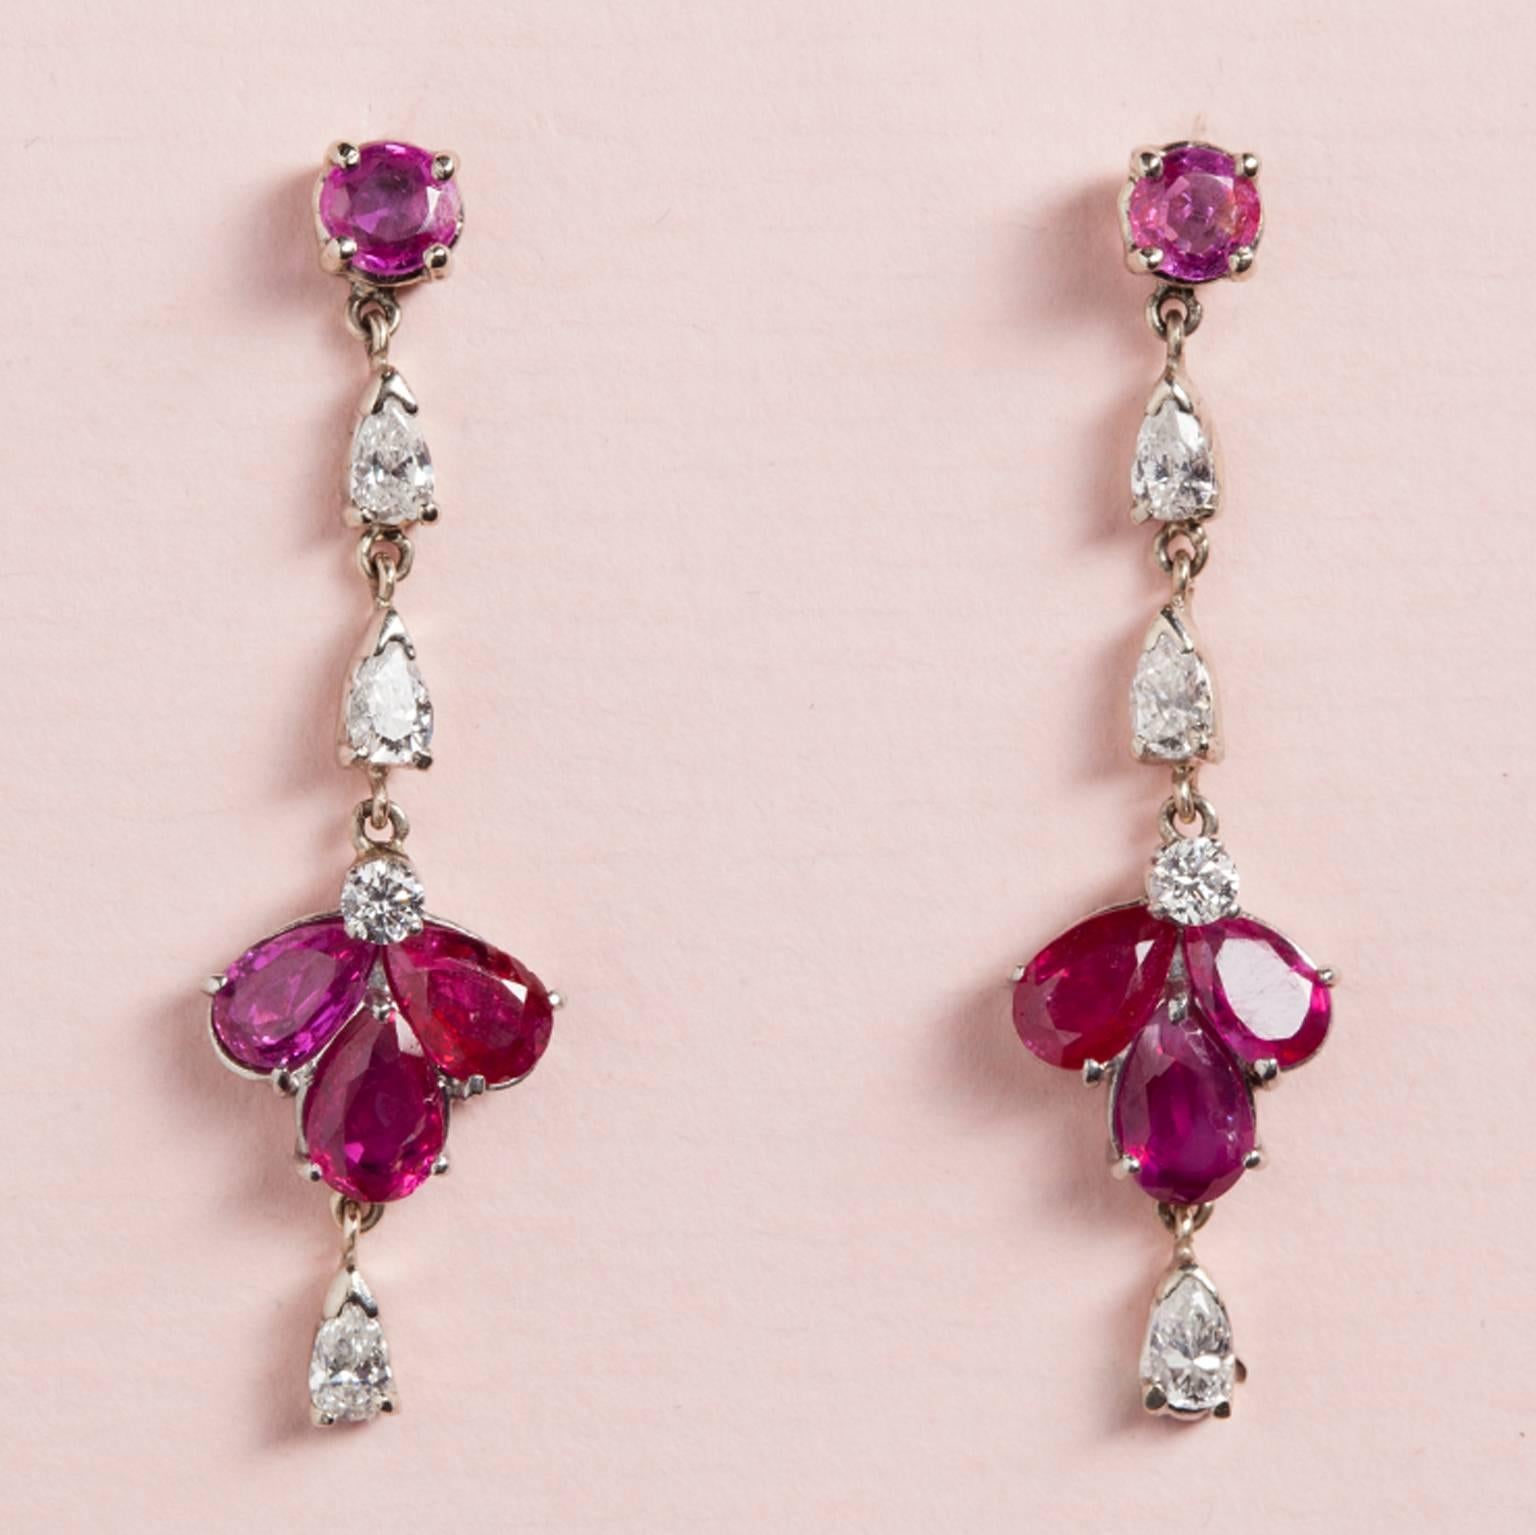 A pair of white gold earrings set with diamond and Burma rubies (app. 2.75 carats), USA, circa 1950.

weight: 5.2 grams
dimensions: 4 x 1.1 cm